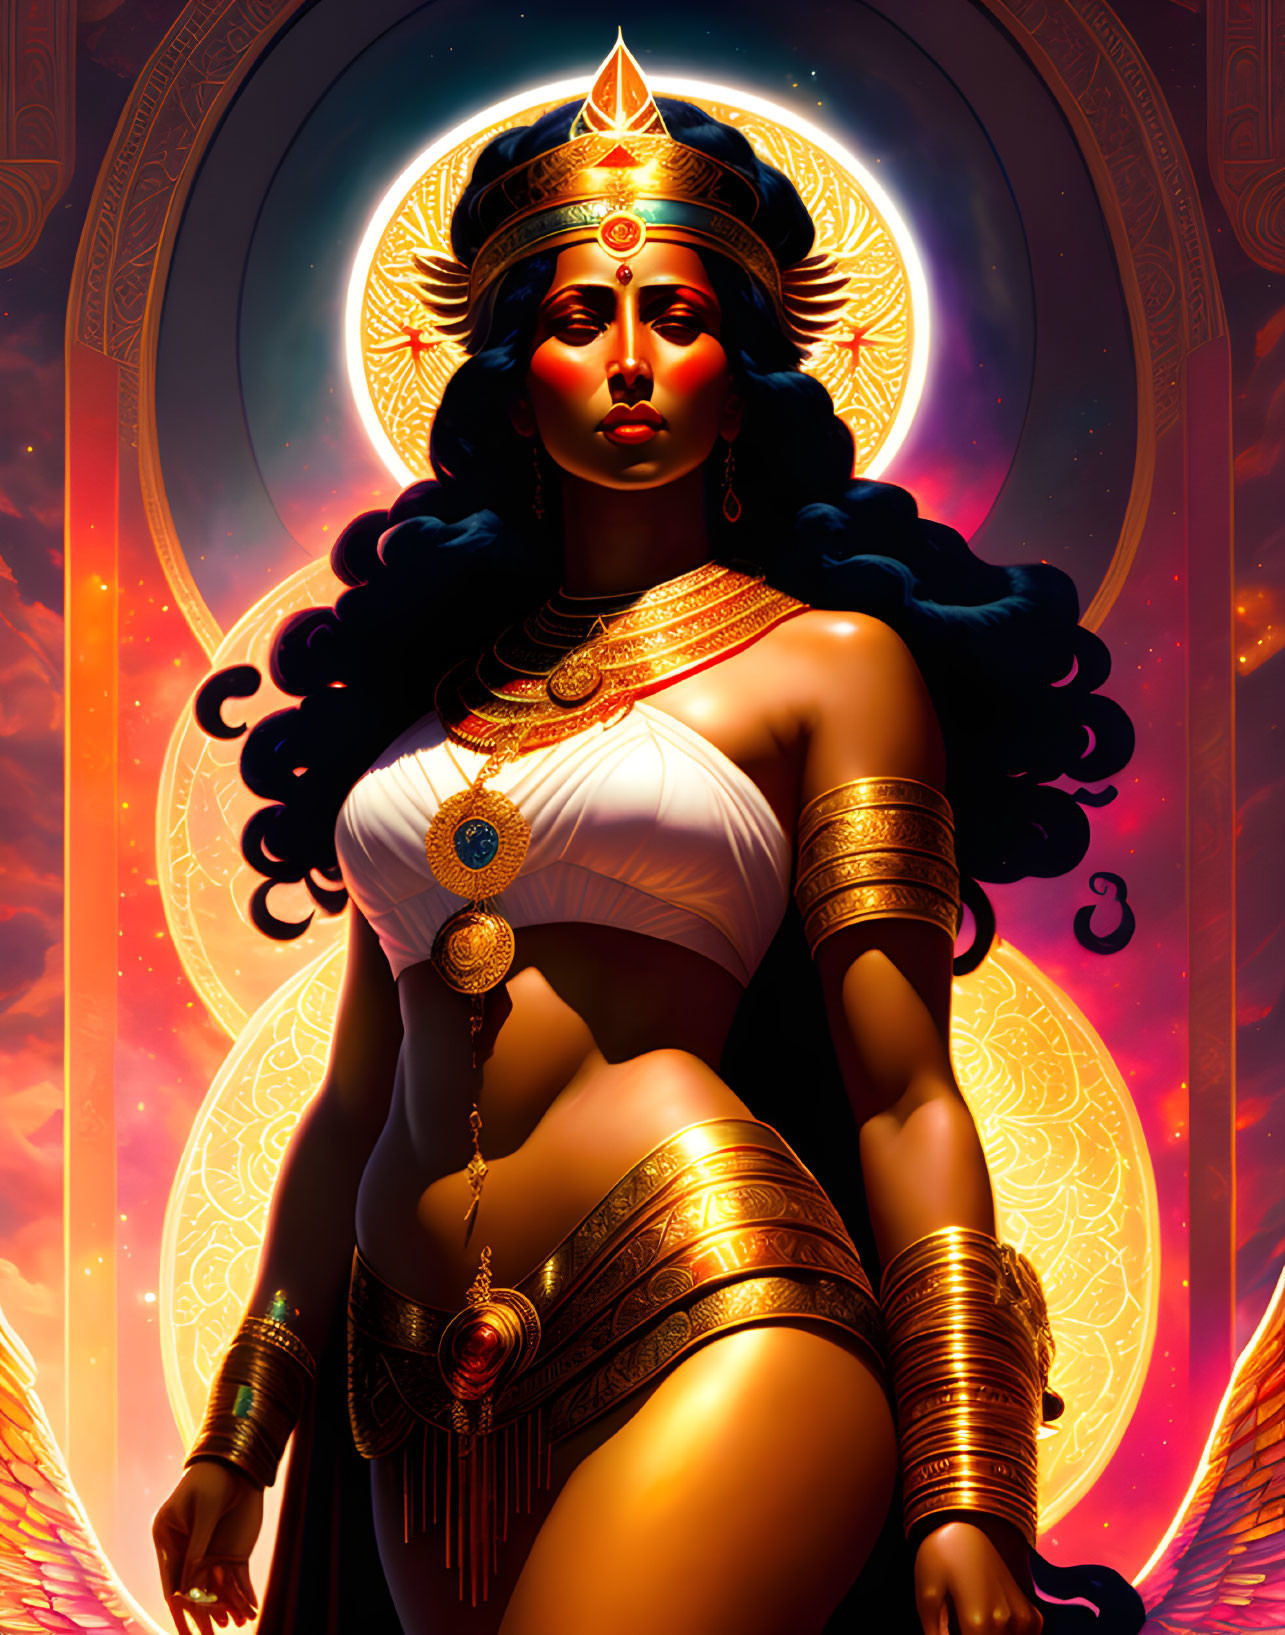 Illustrated female figure with blue skin and golden jewelry in cosmic setting